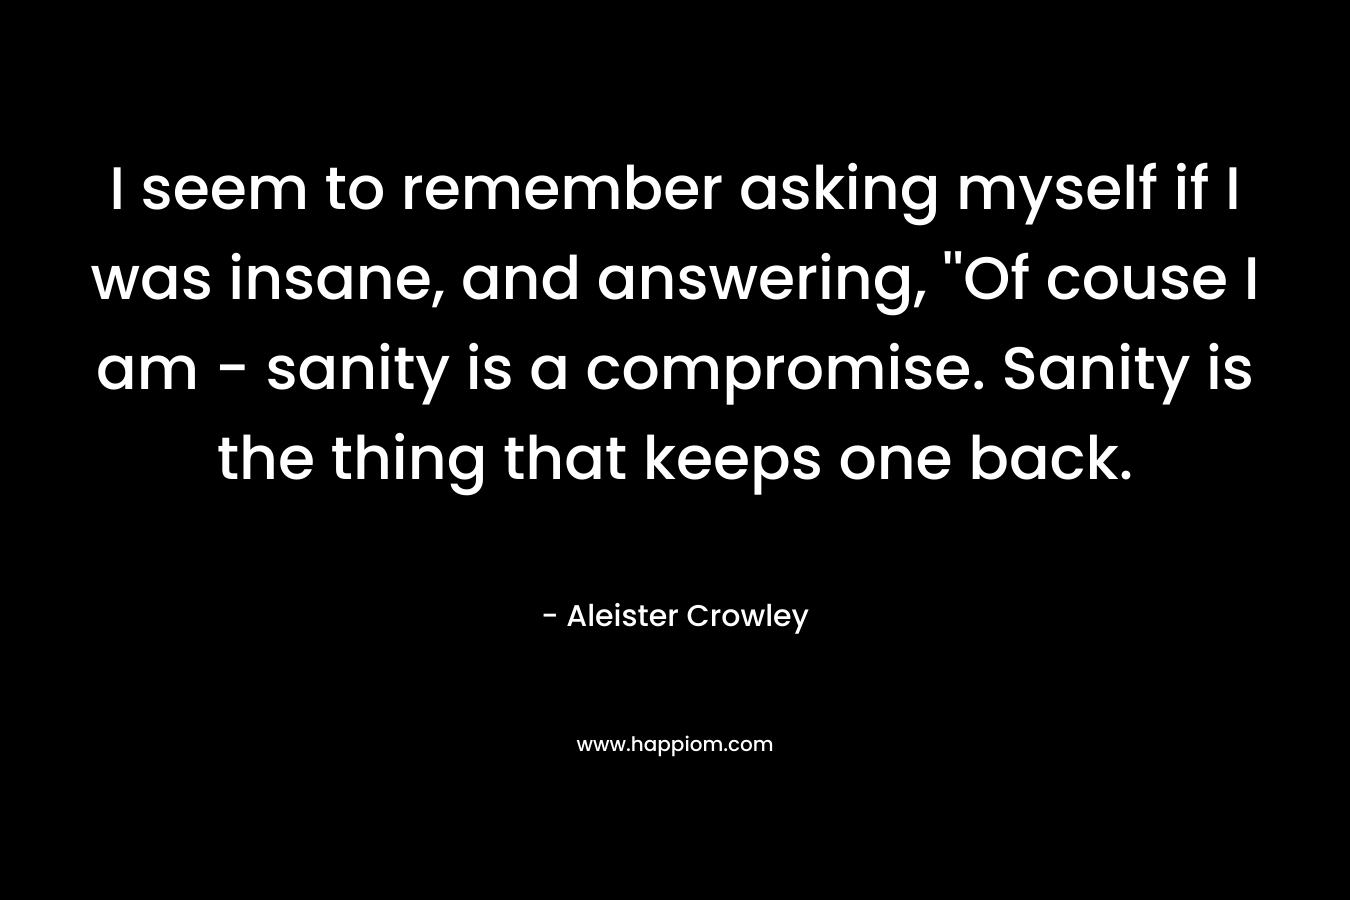 I seem to remember asking myself if I was insane, and answering, ''Of couse I am - sanity is a compromise. Sanity is the thing that keeps one back.